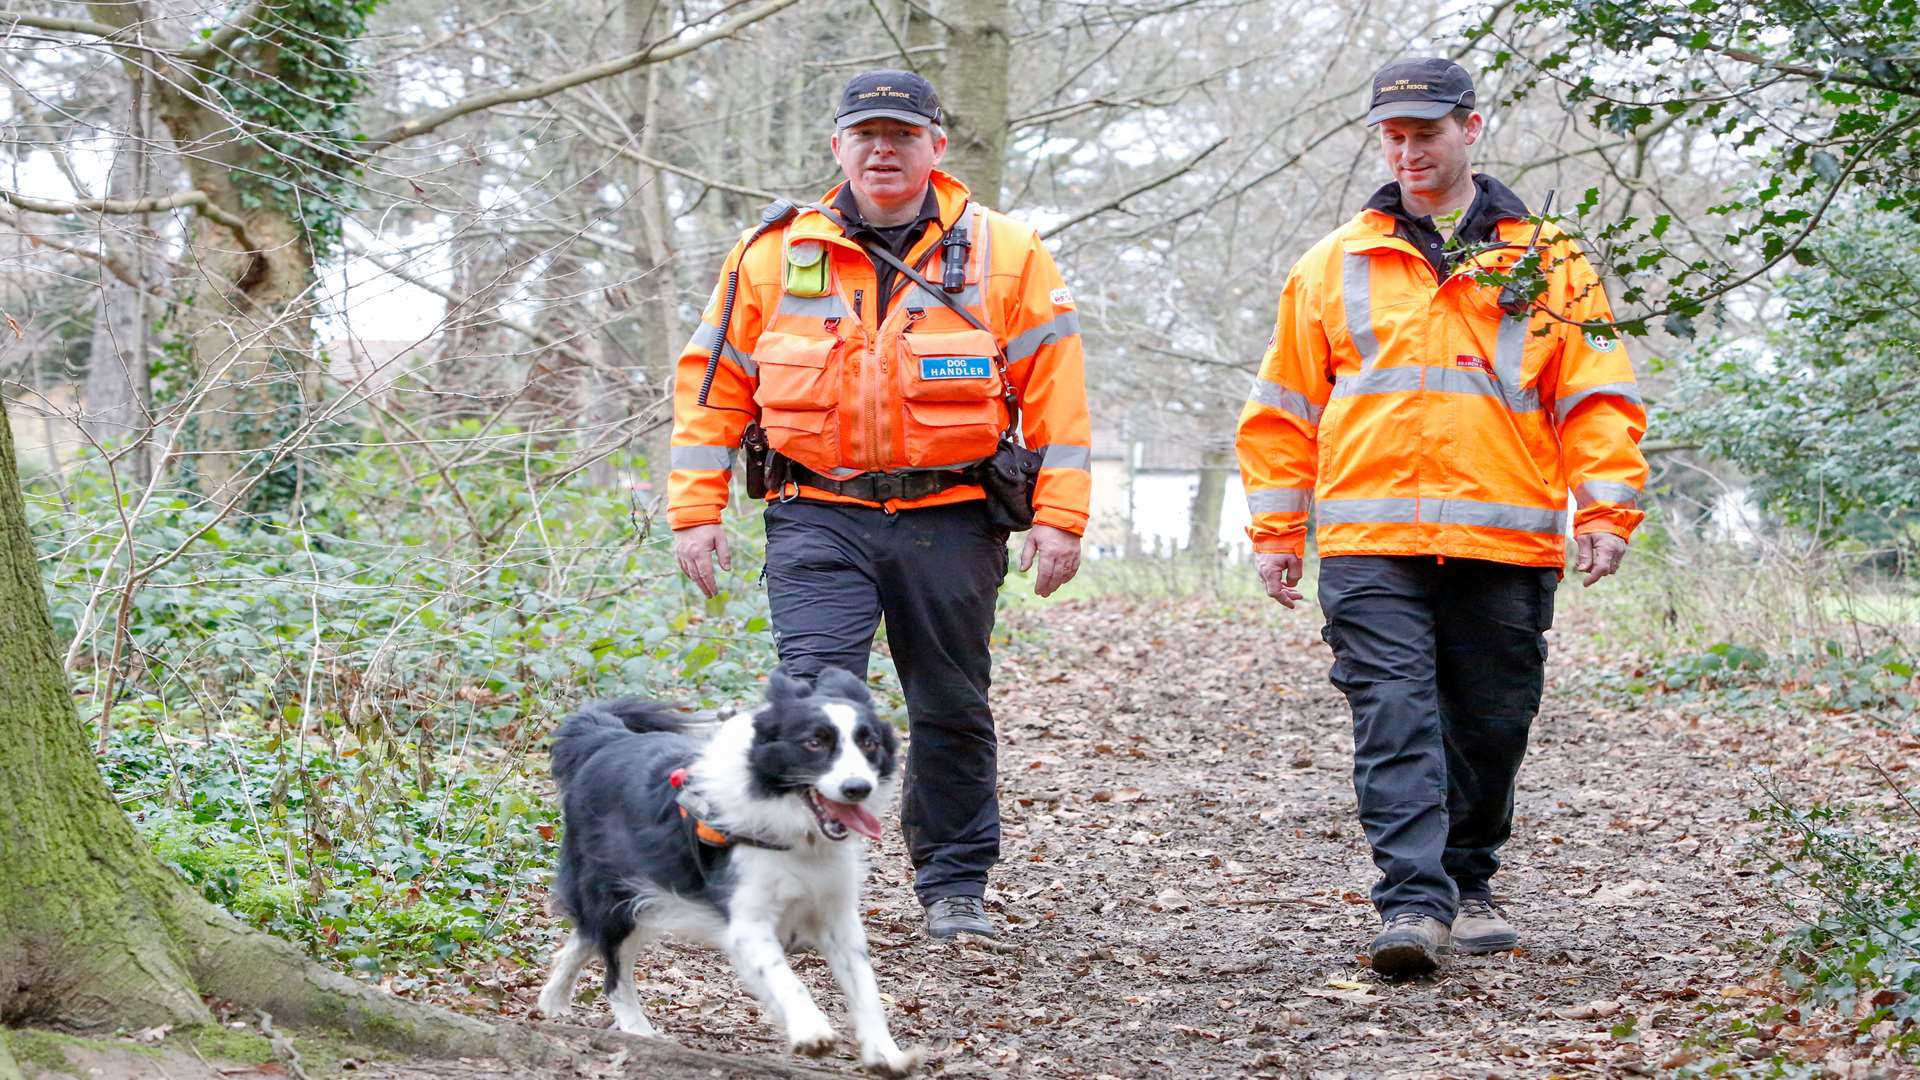 A search dog like Bryn looking for a missing person. Stock image